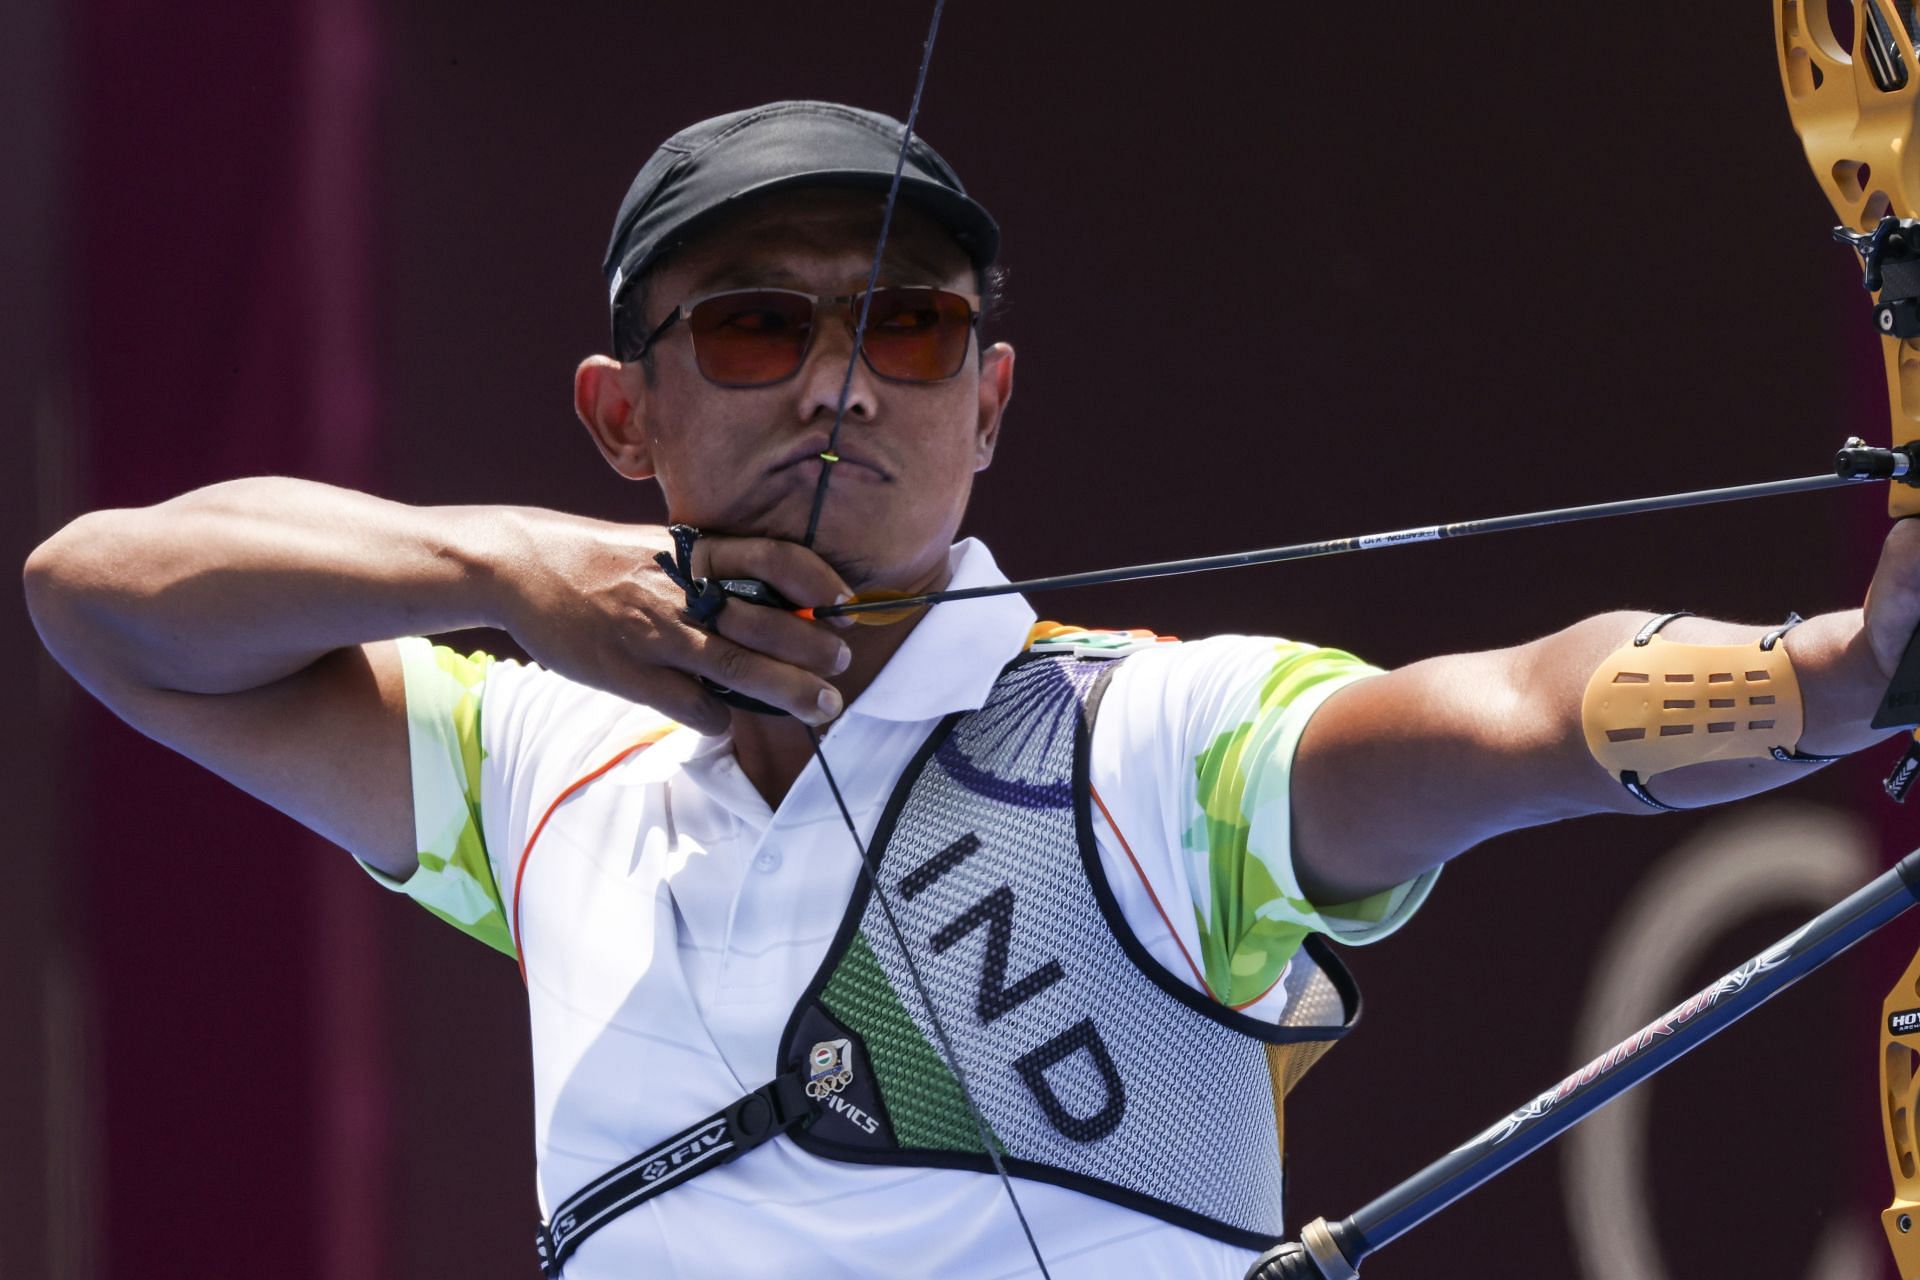 Indian archer Tarundeep Rai in action at the Tokyo Olympics. (PC: Getty Images)